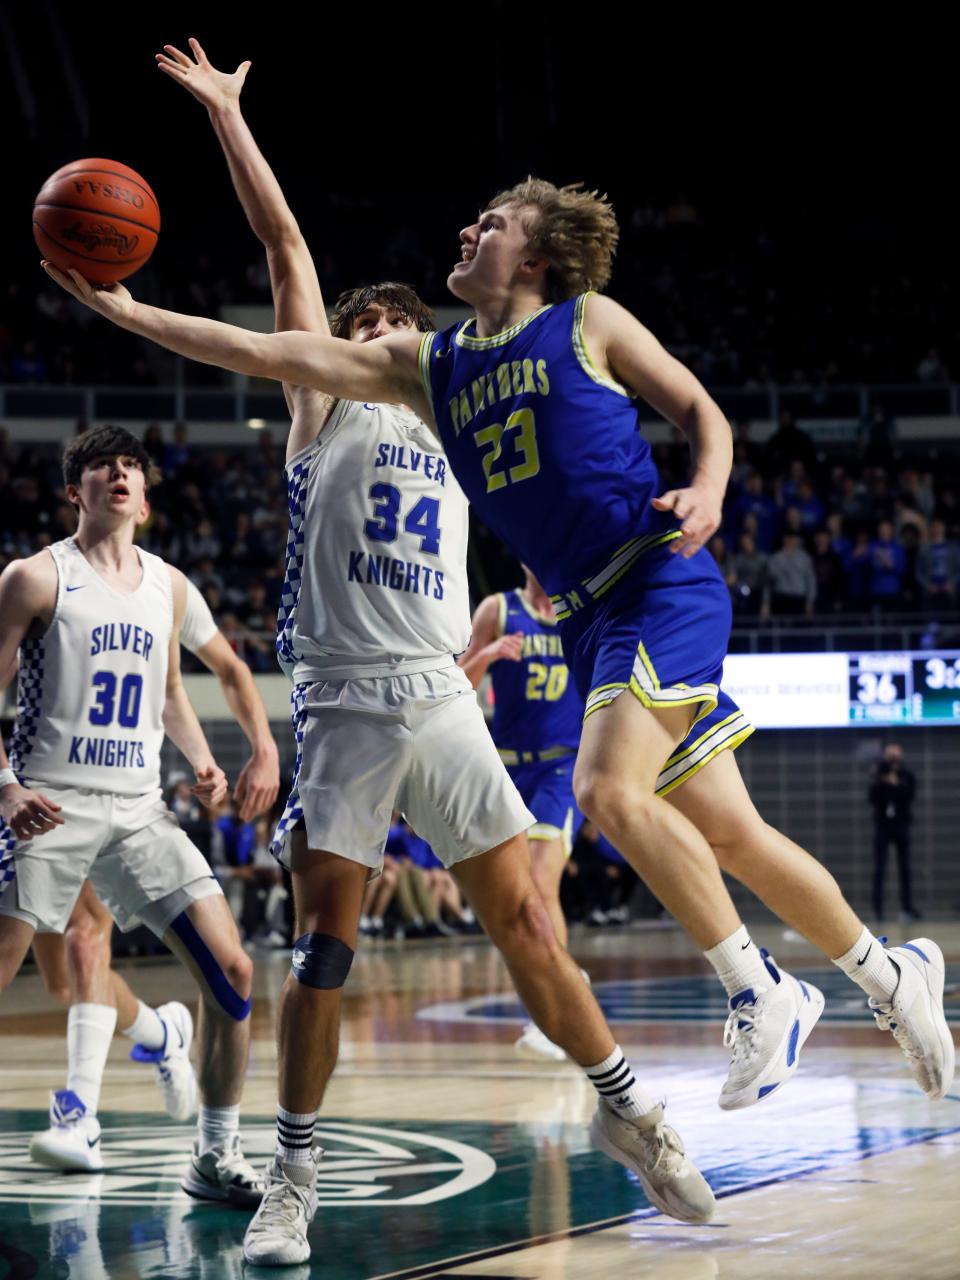 Hayden Jarrett, of Maysville, tries to score in the lane during a 61-38 loss to unbeaten, top-ranked Columbus Ready in a Division II regional semifinal on March 9 at the Ohio University Convocation Center in Athens. Jarrett was named TR Prime Time Player of the Year.